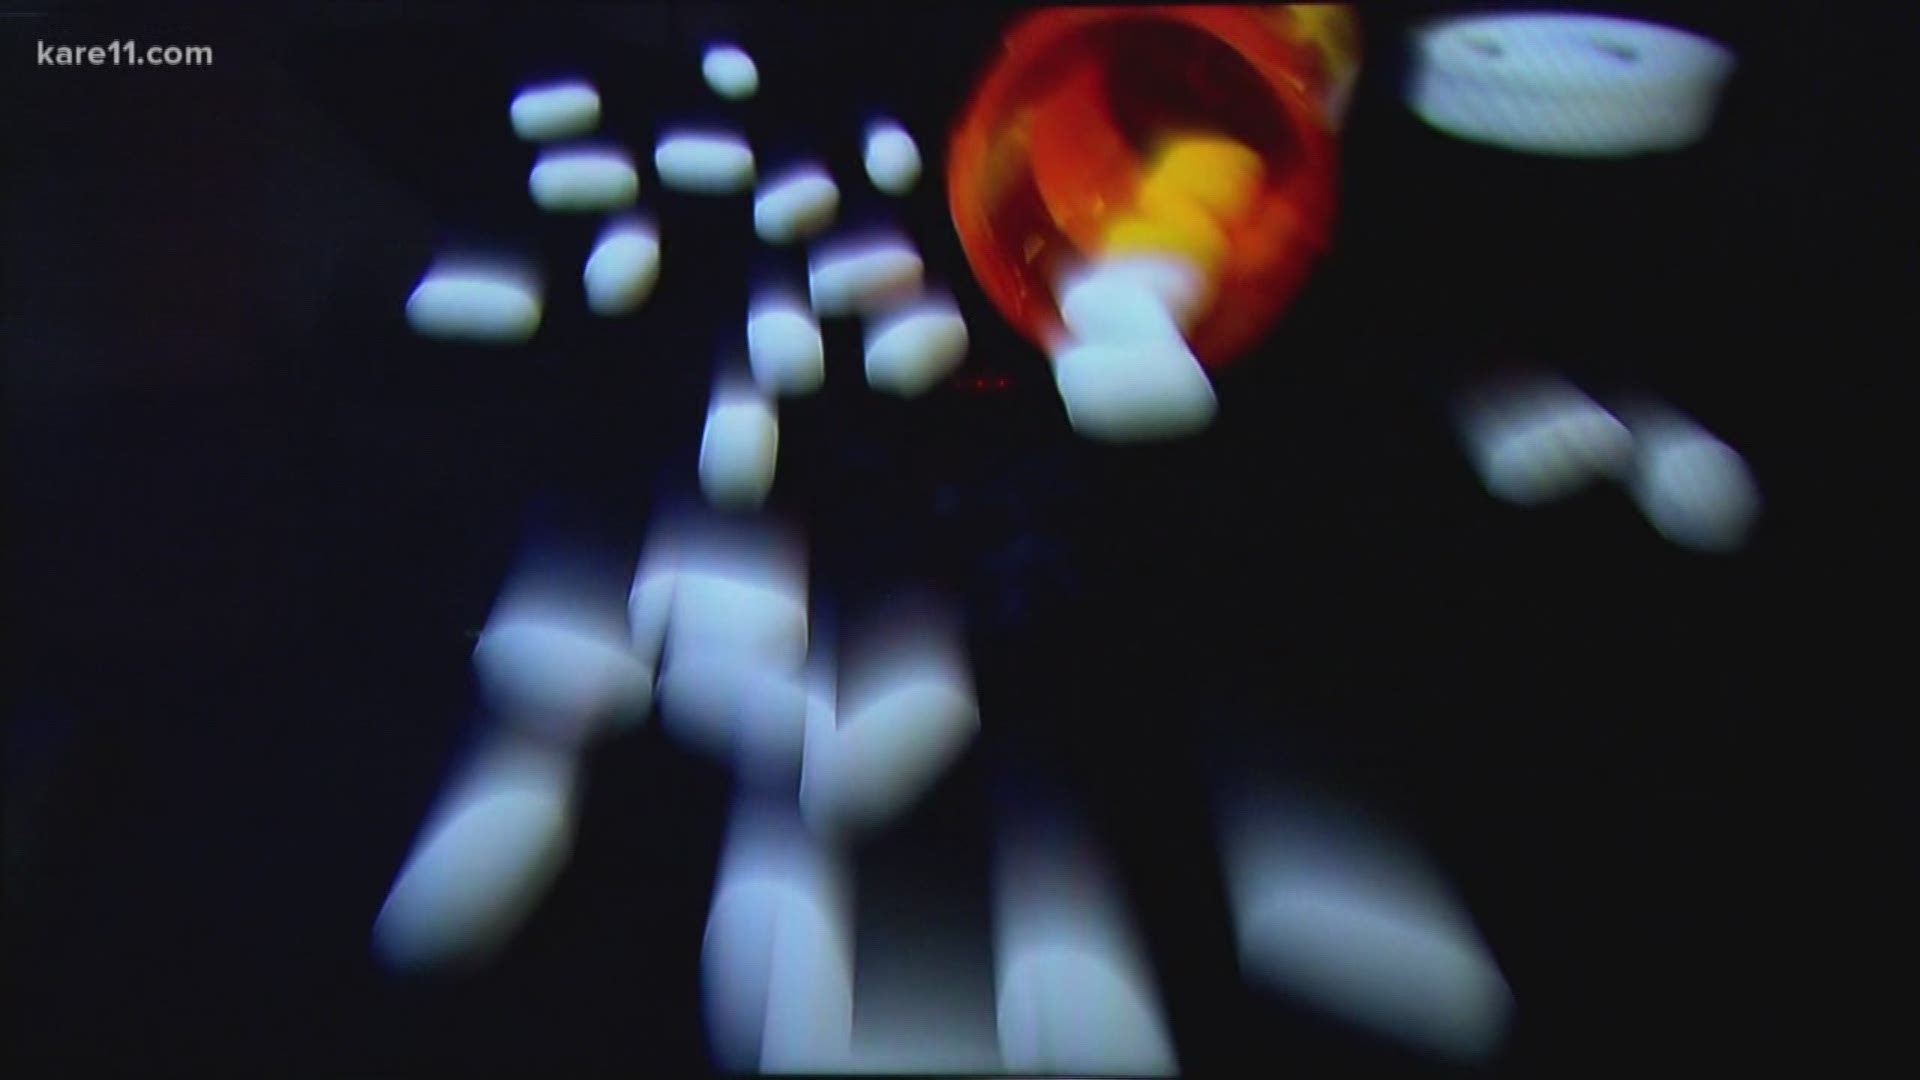 A system that helps patients cover the skyrocketing cost of their prescription medications also helps pharmaceutical companies drive up prices and profits, according to experts interviewed by KARE 11 Investigates. https://kare11.tv/2t6QDUE